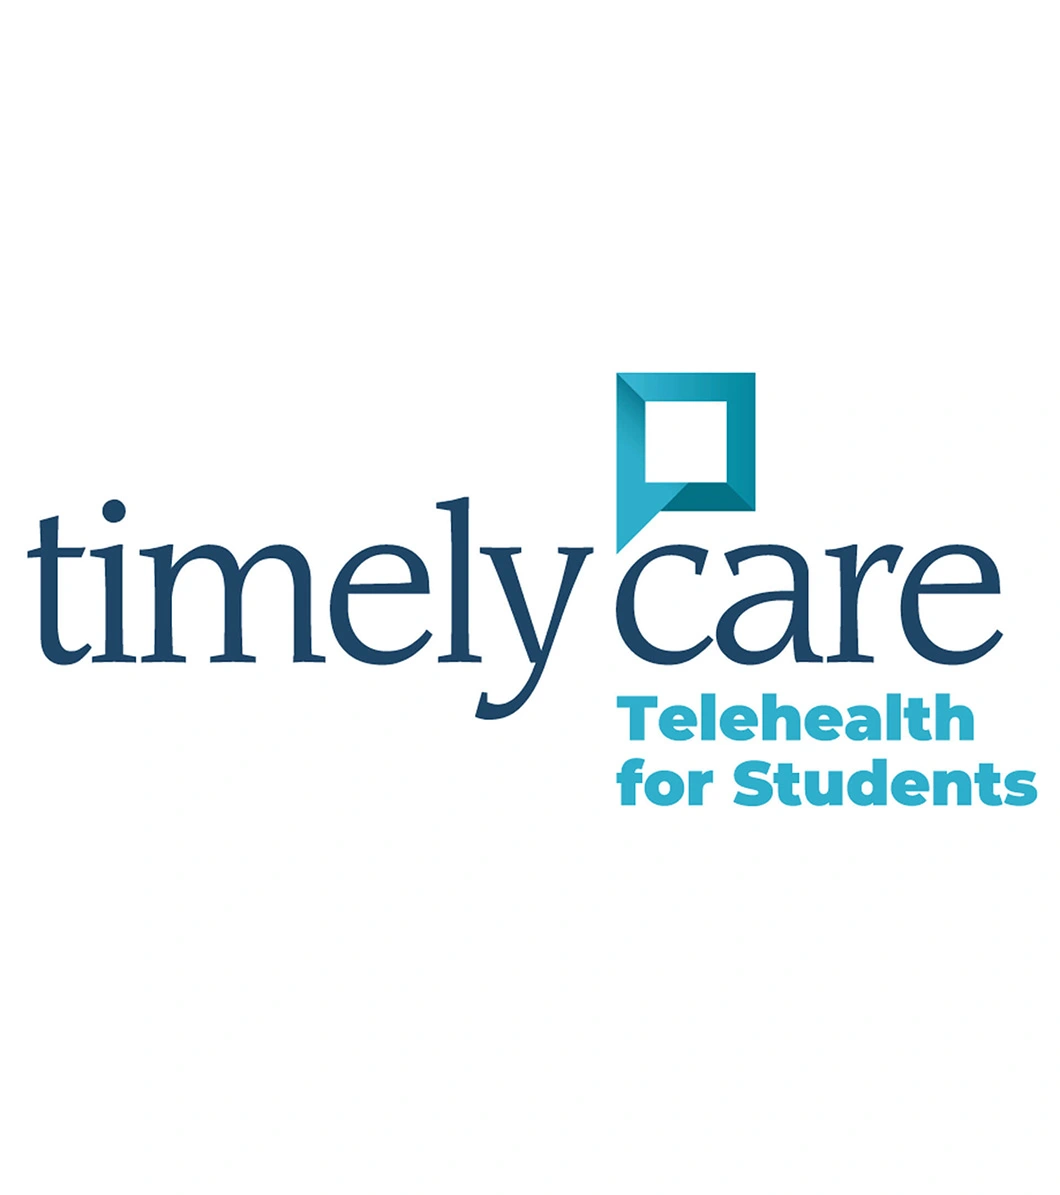 The timelyCare blue logo for telehealth for students